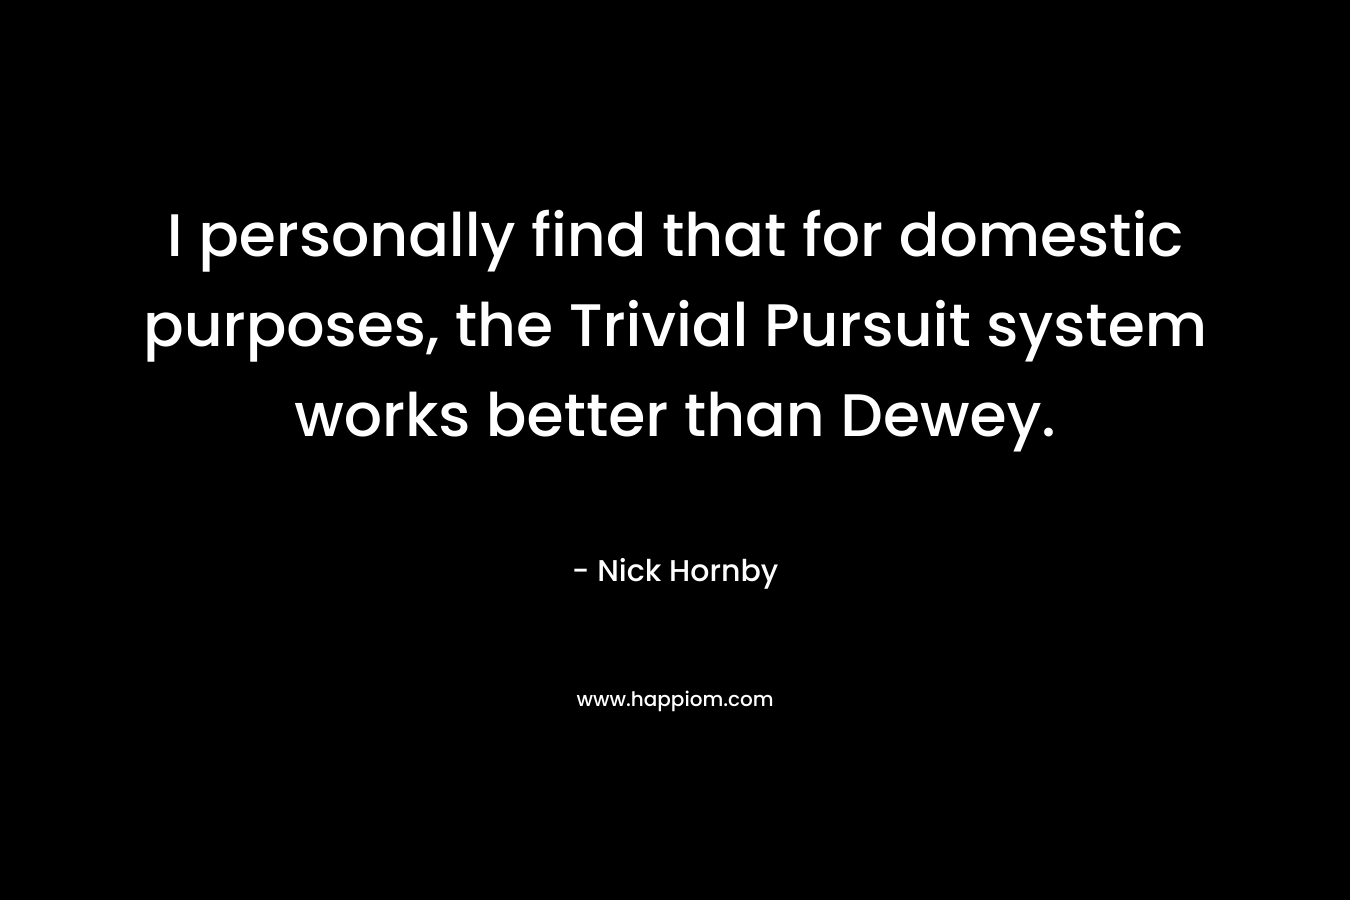 I personally find that for domestic purposes, the Trivial Pursuit system works better than Dewey.